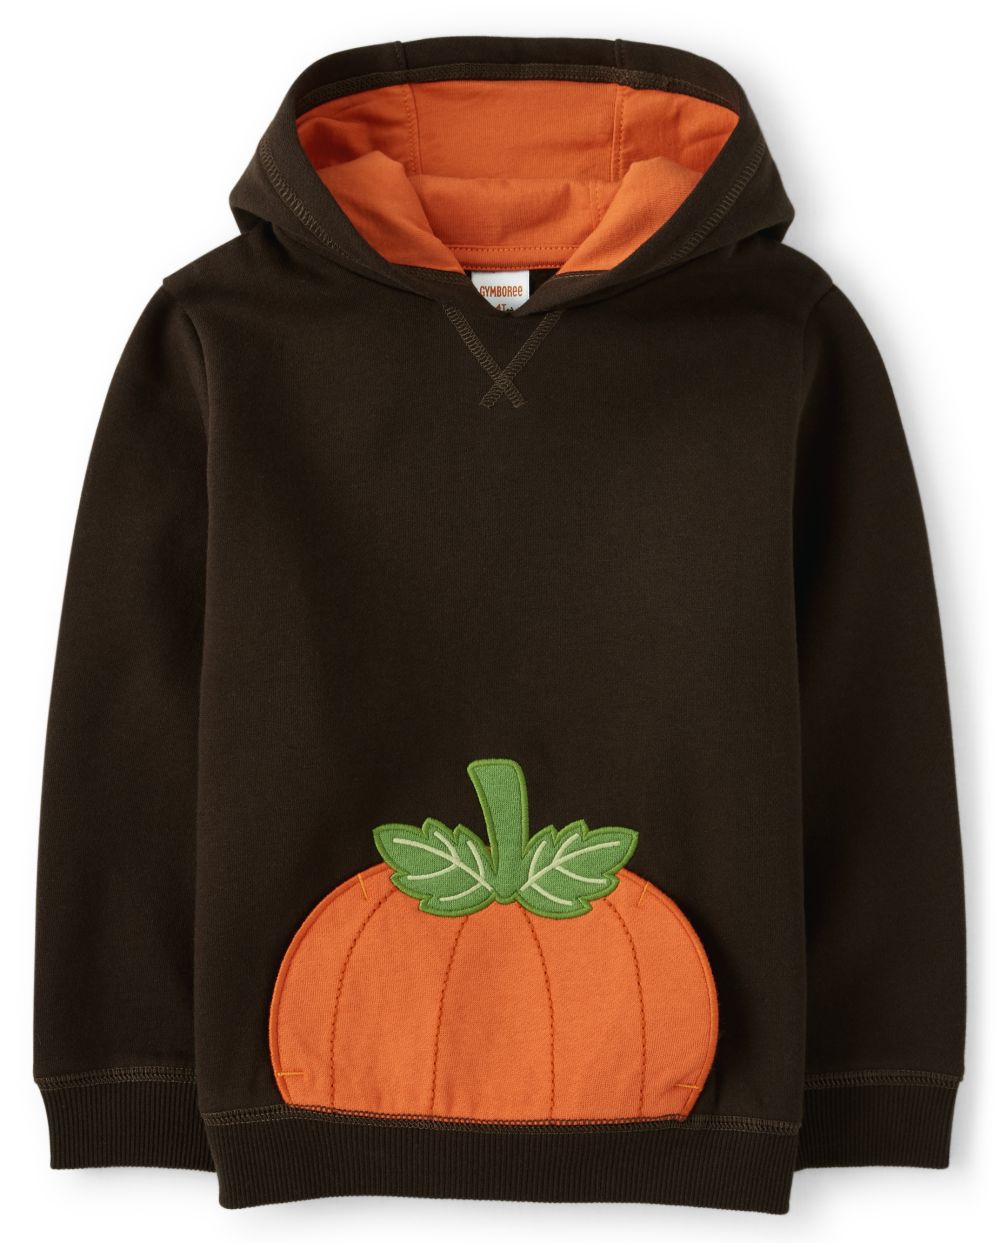 popular matching sibling fall outfits, brown and orange pumpkin hoodie